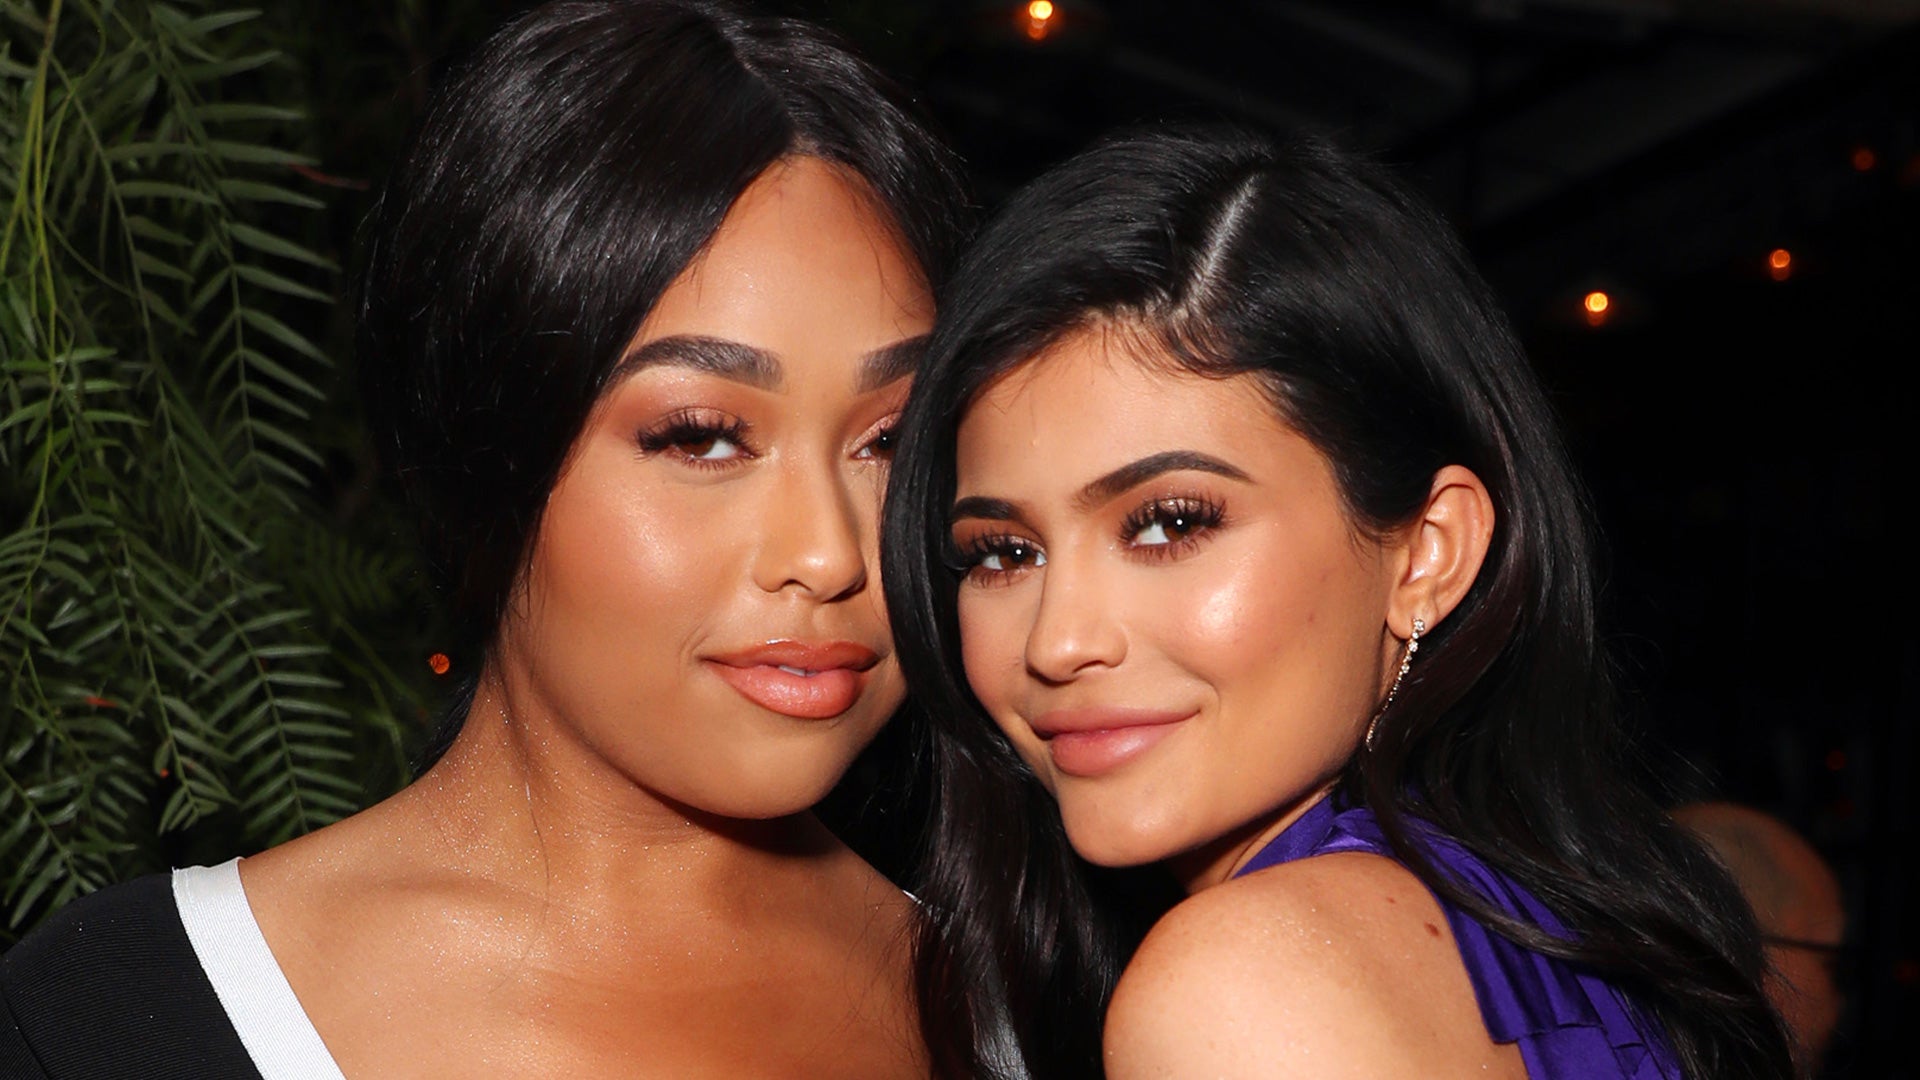 Kylie Jenner, Jordyn Woods Hanging Out Over a Year Before Public Outing